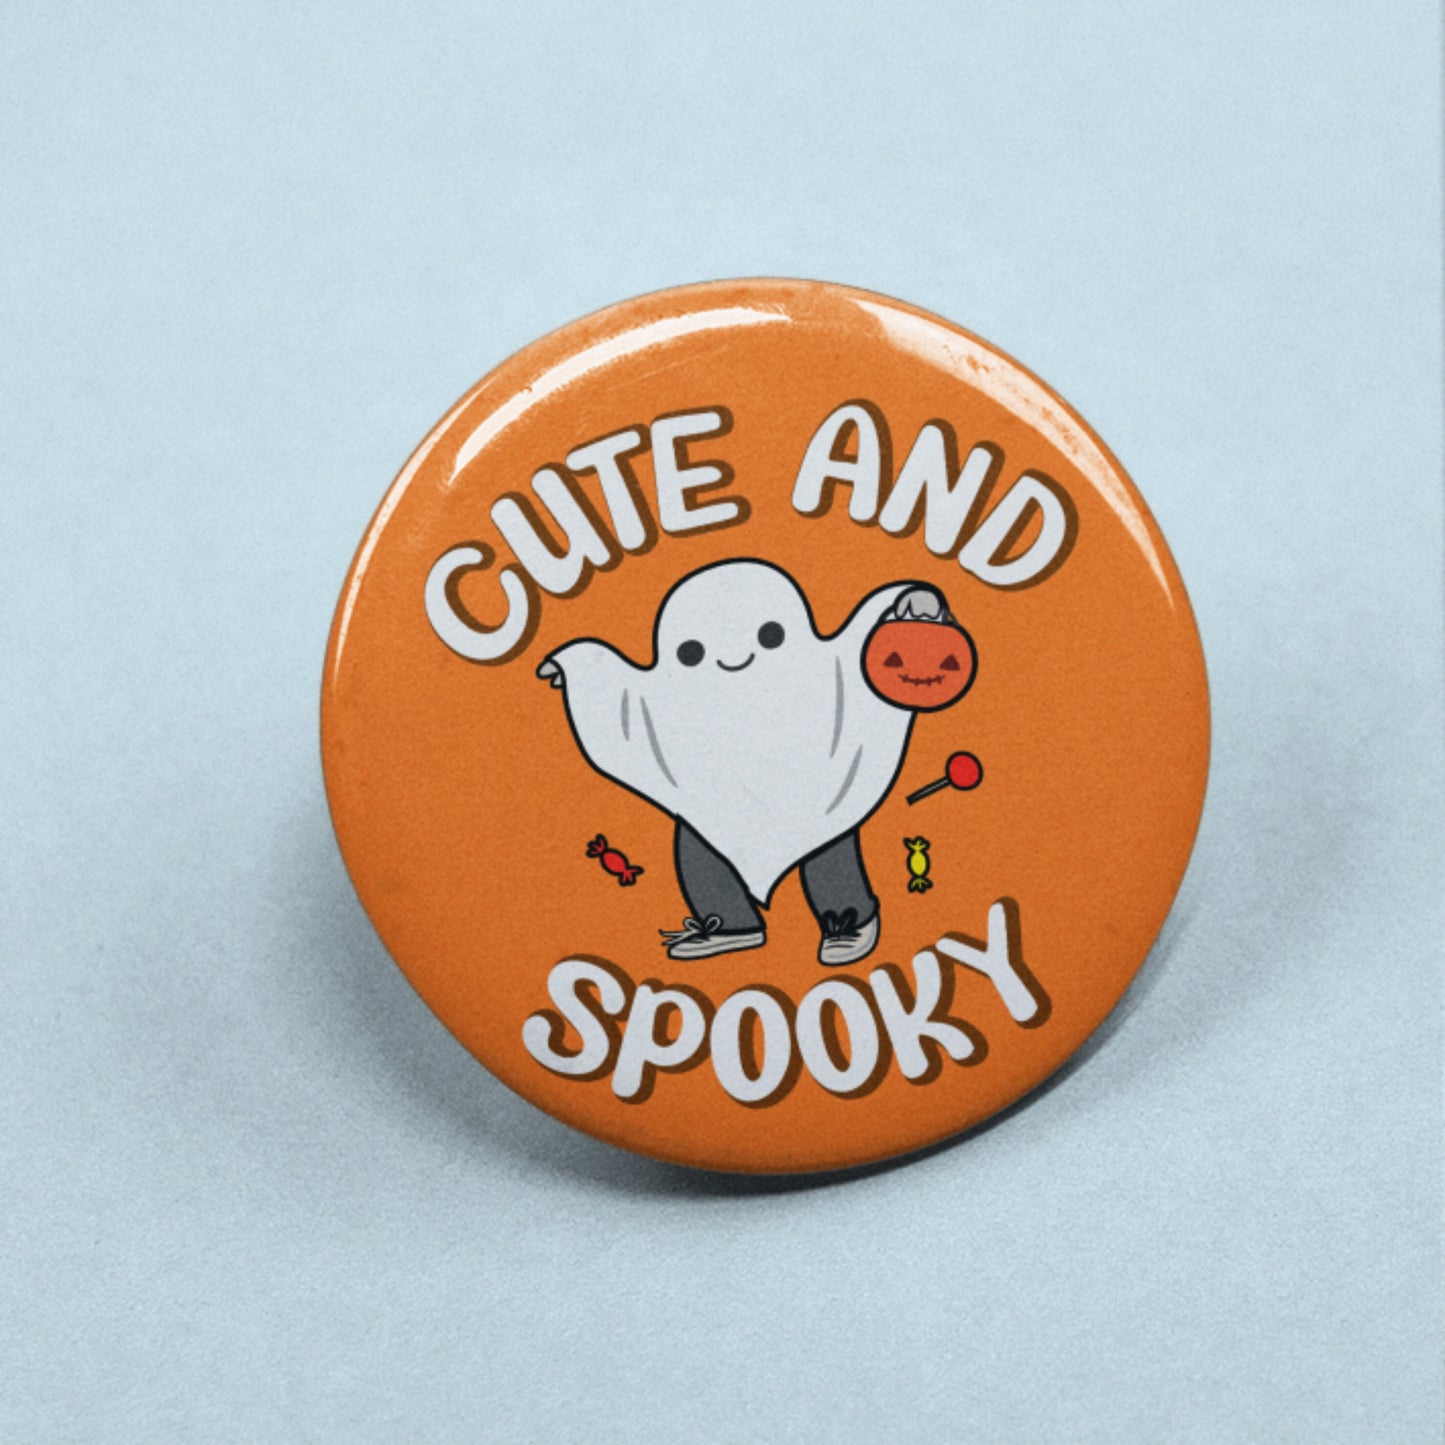 Cute And Spooky Pin Badge | Halloween Gift, Cute Cats, Spooky, Ghosts